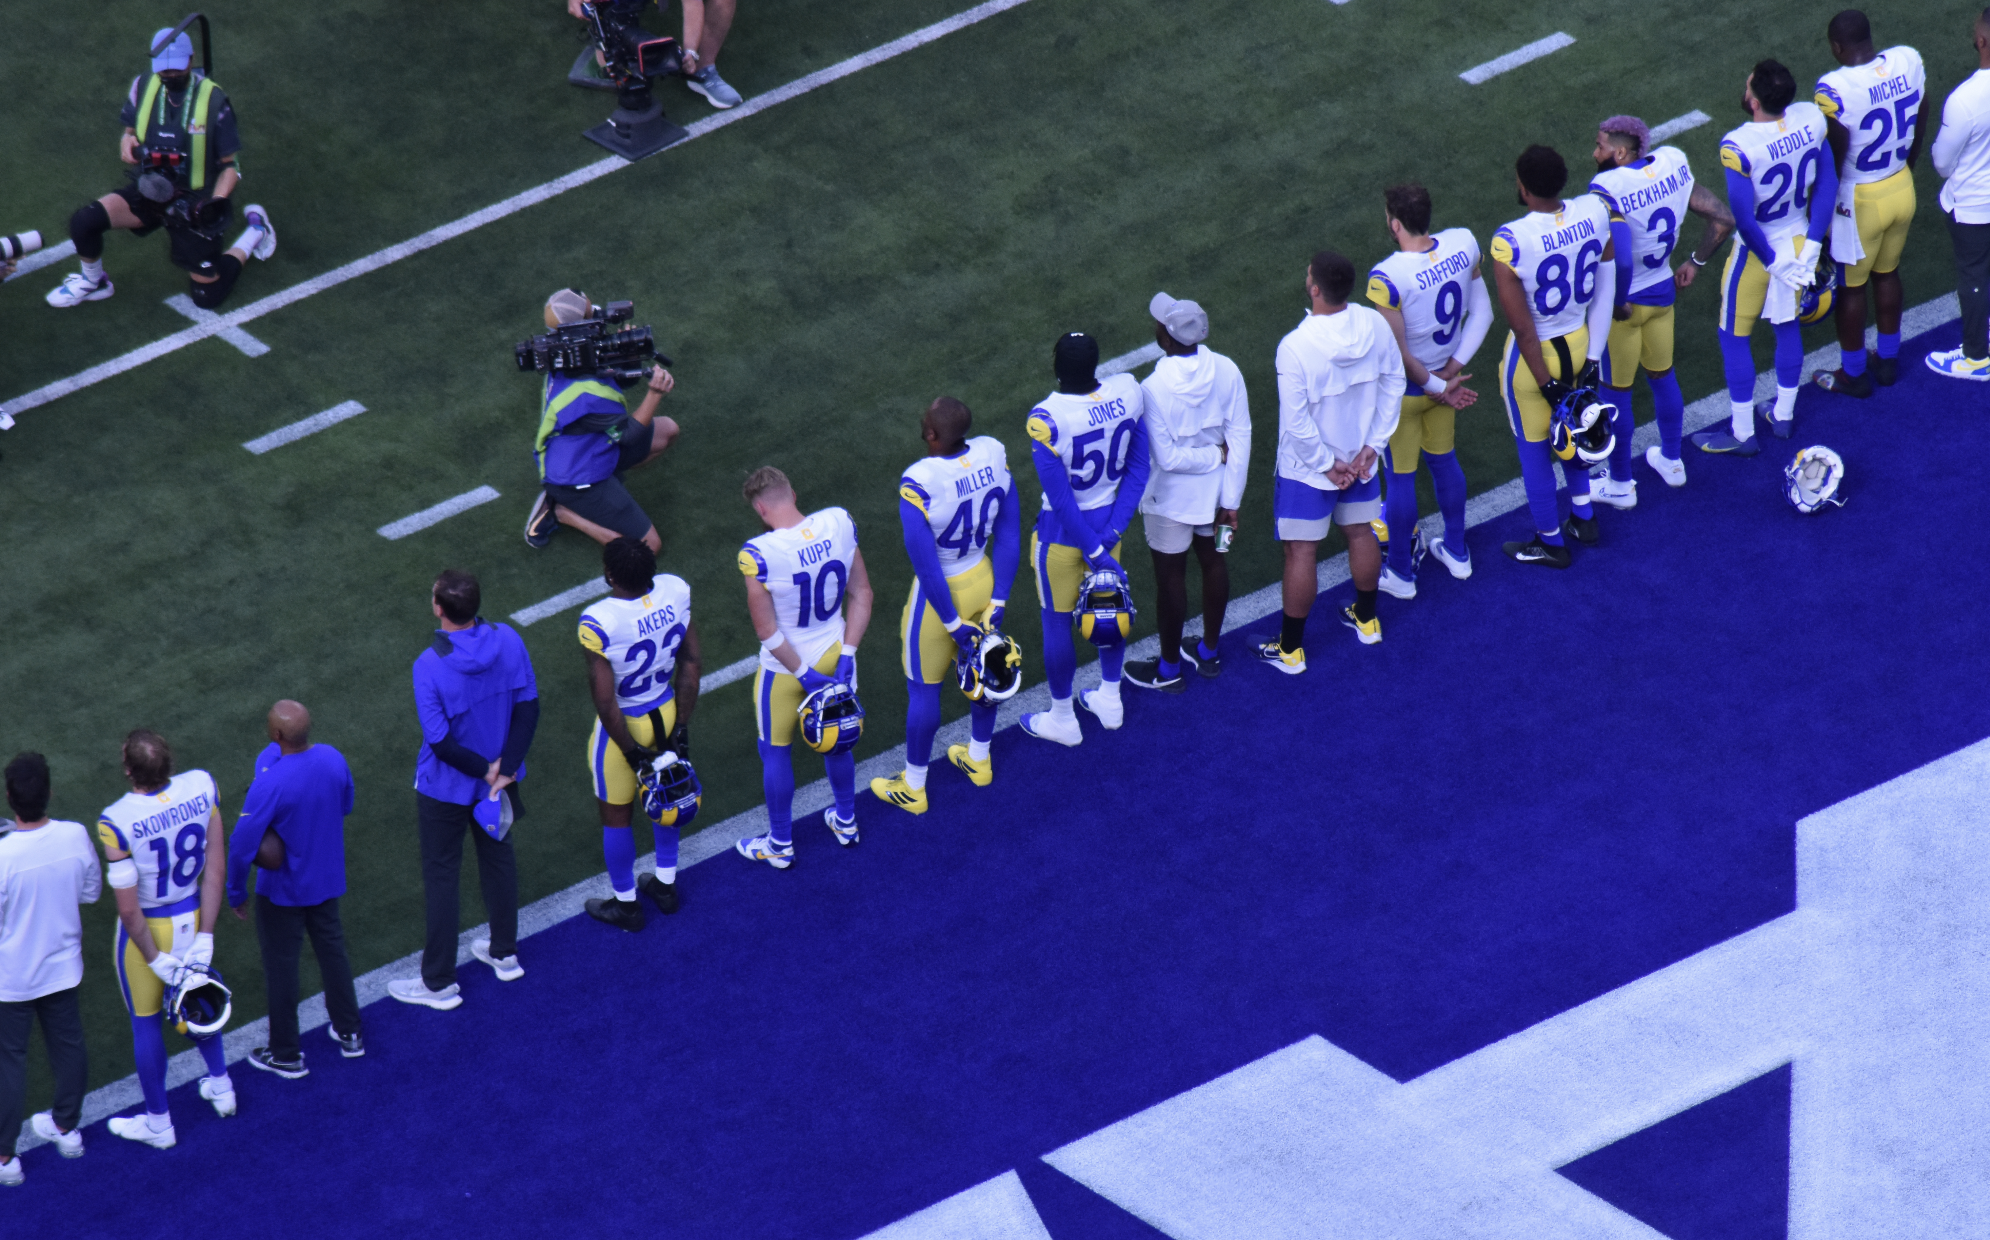 The Rams line up during the National Anthem